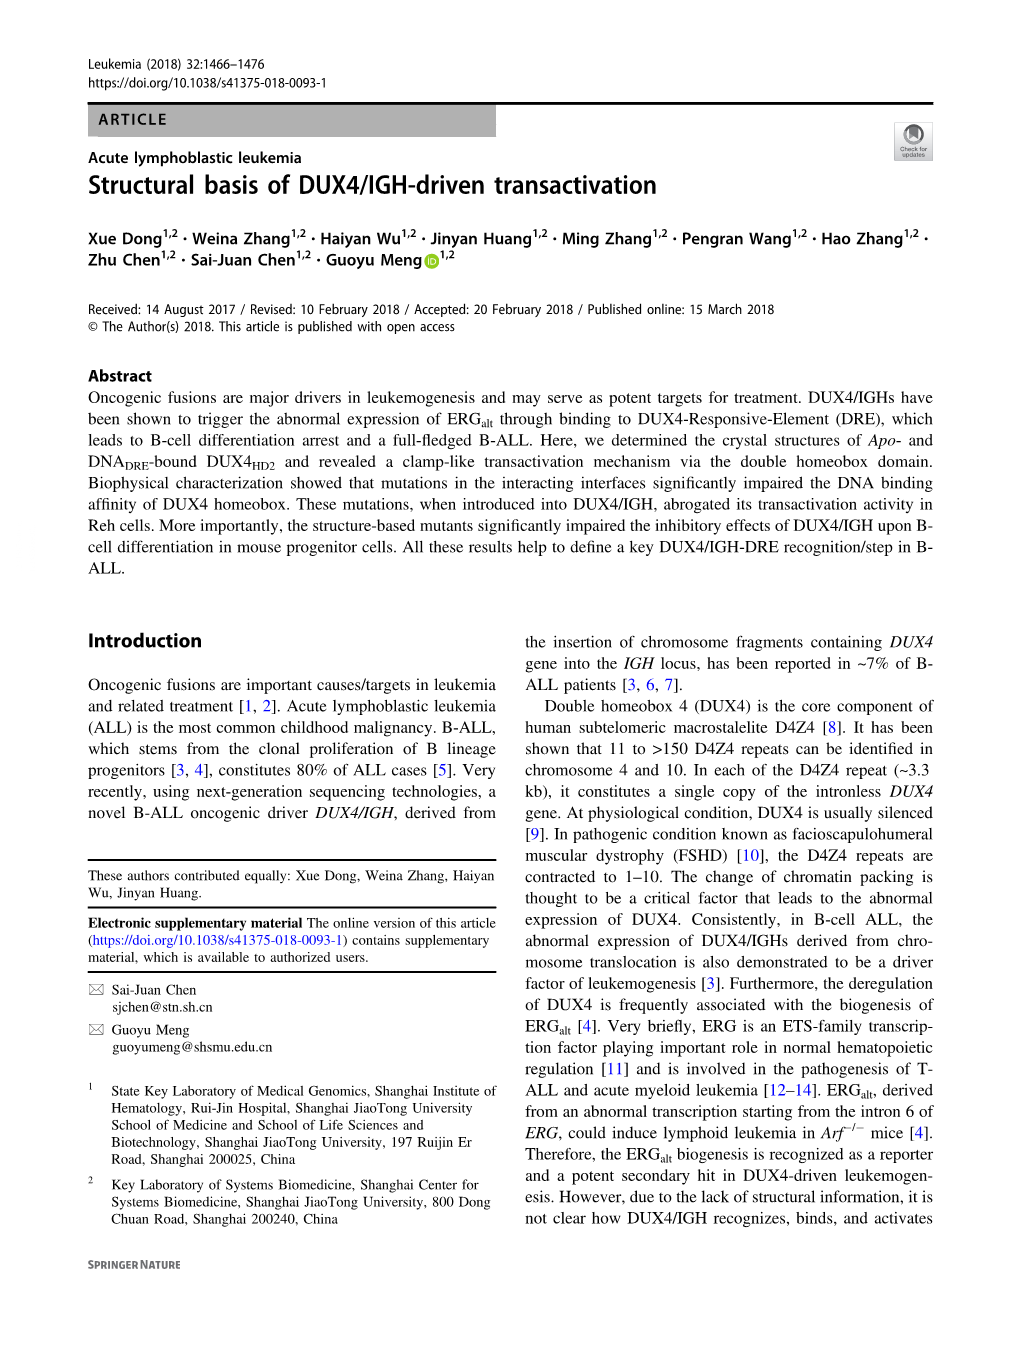 Structural Basis of DUX4/IGH-Driven Transactivation